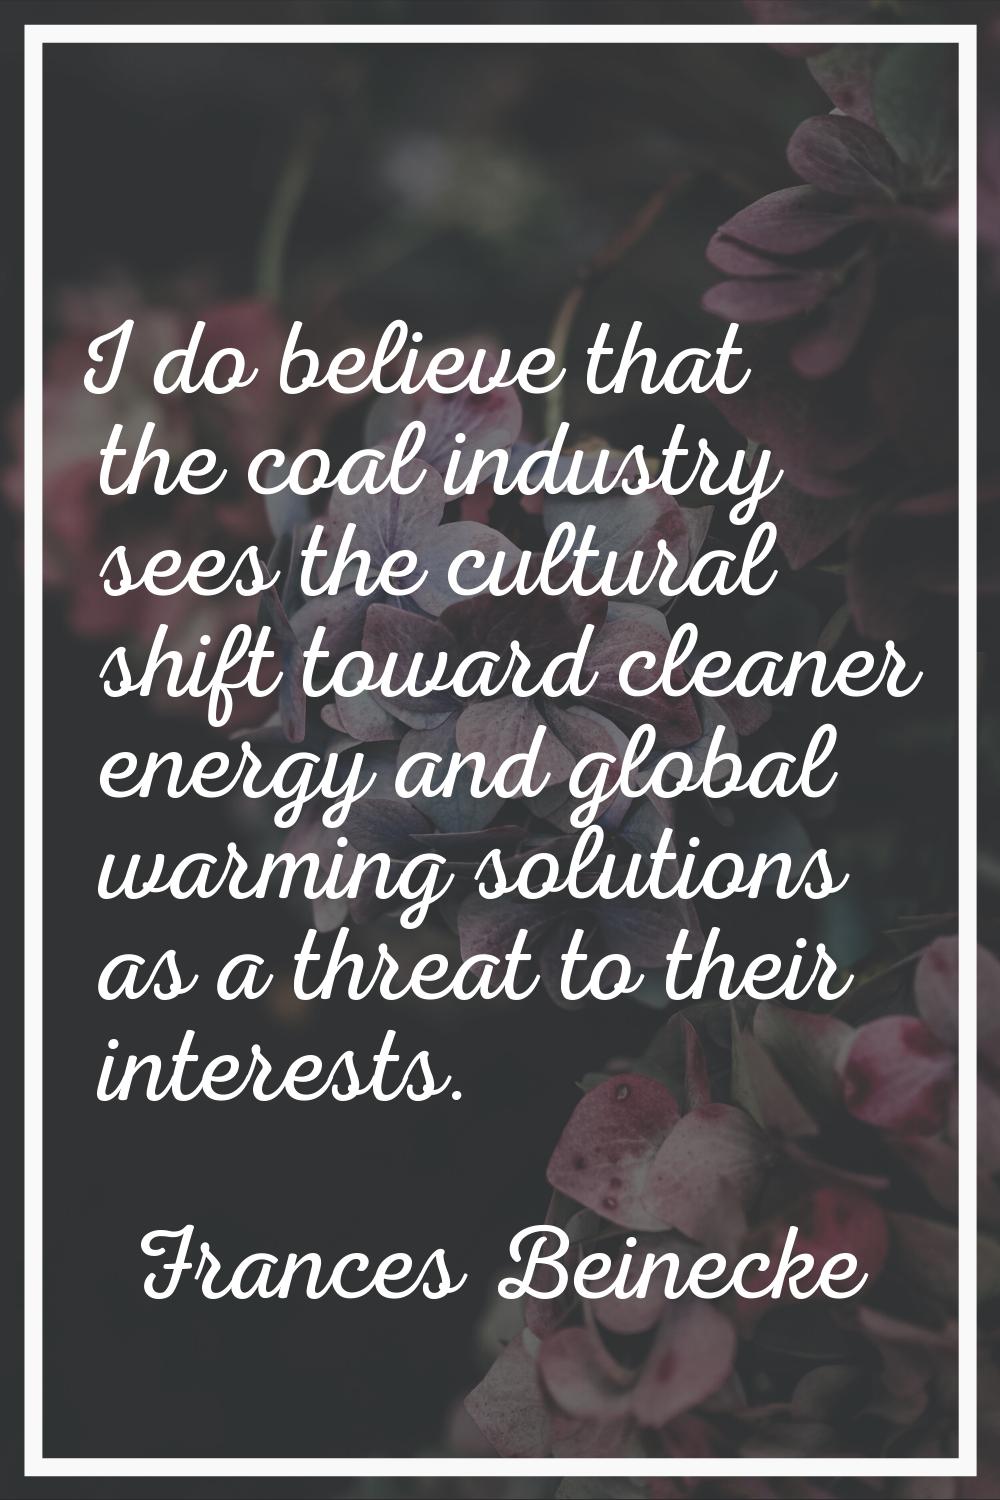 I do believe that the coal industry sees the cultural shift toward cleaner energy and global warmin